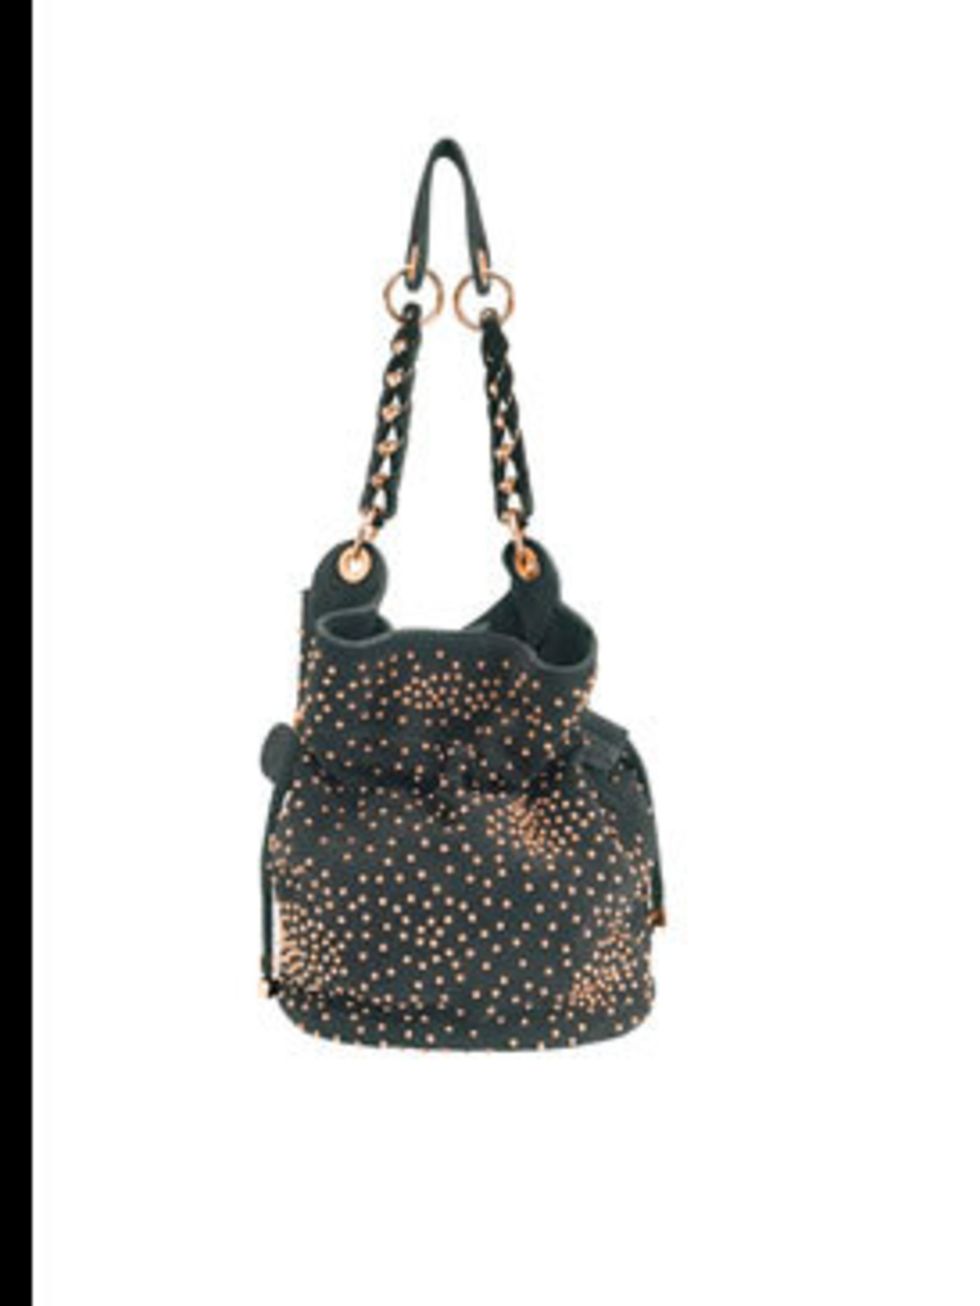 <p>Black studded bag, £159, by <a href="http://www.reiss.co.uk/shop/womens/bags/sabina/black/">Reiss</a></p>